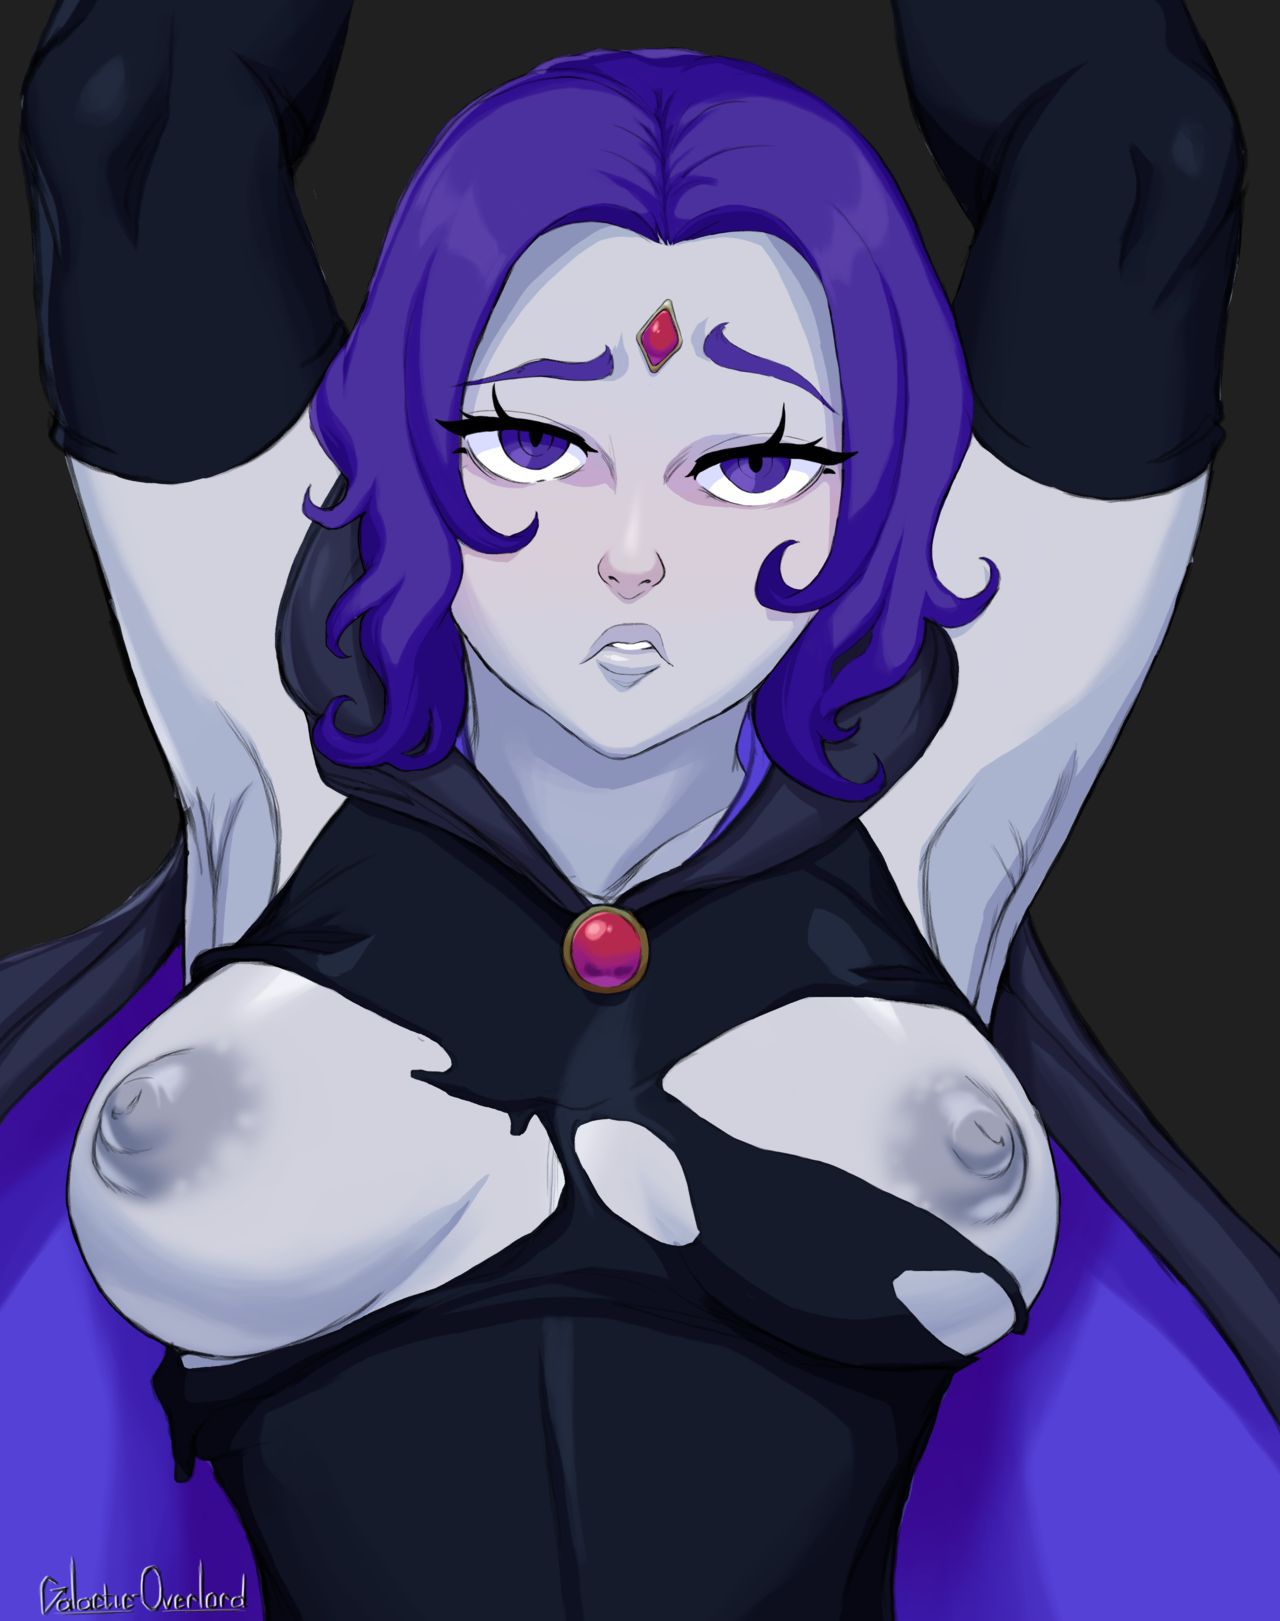 [GalacticOverlord] Raven 7